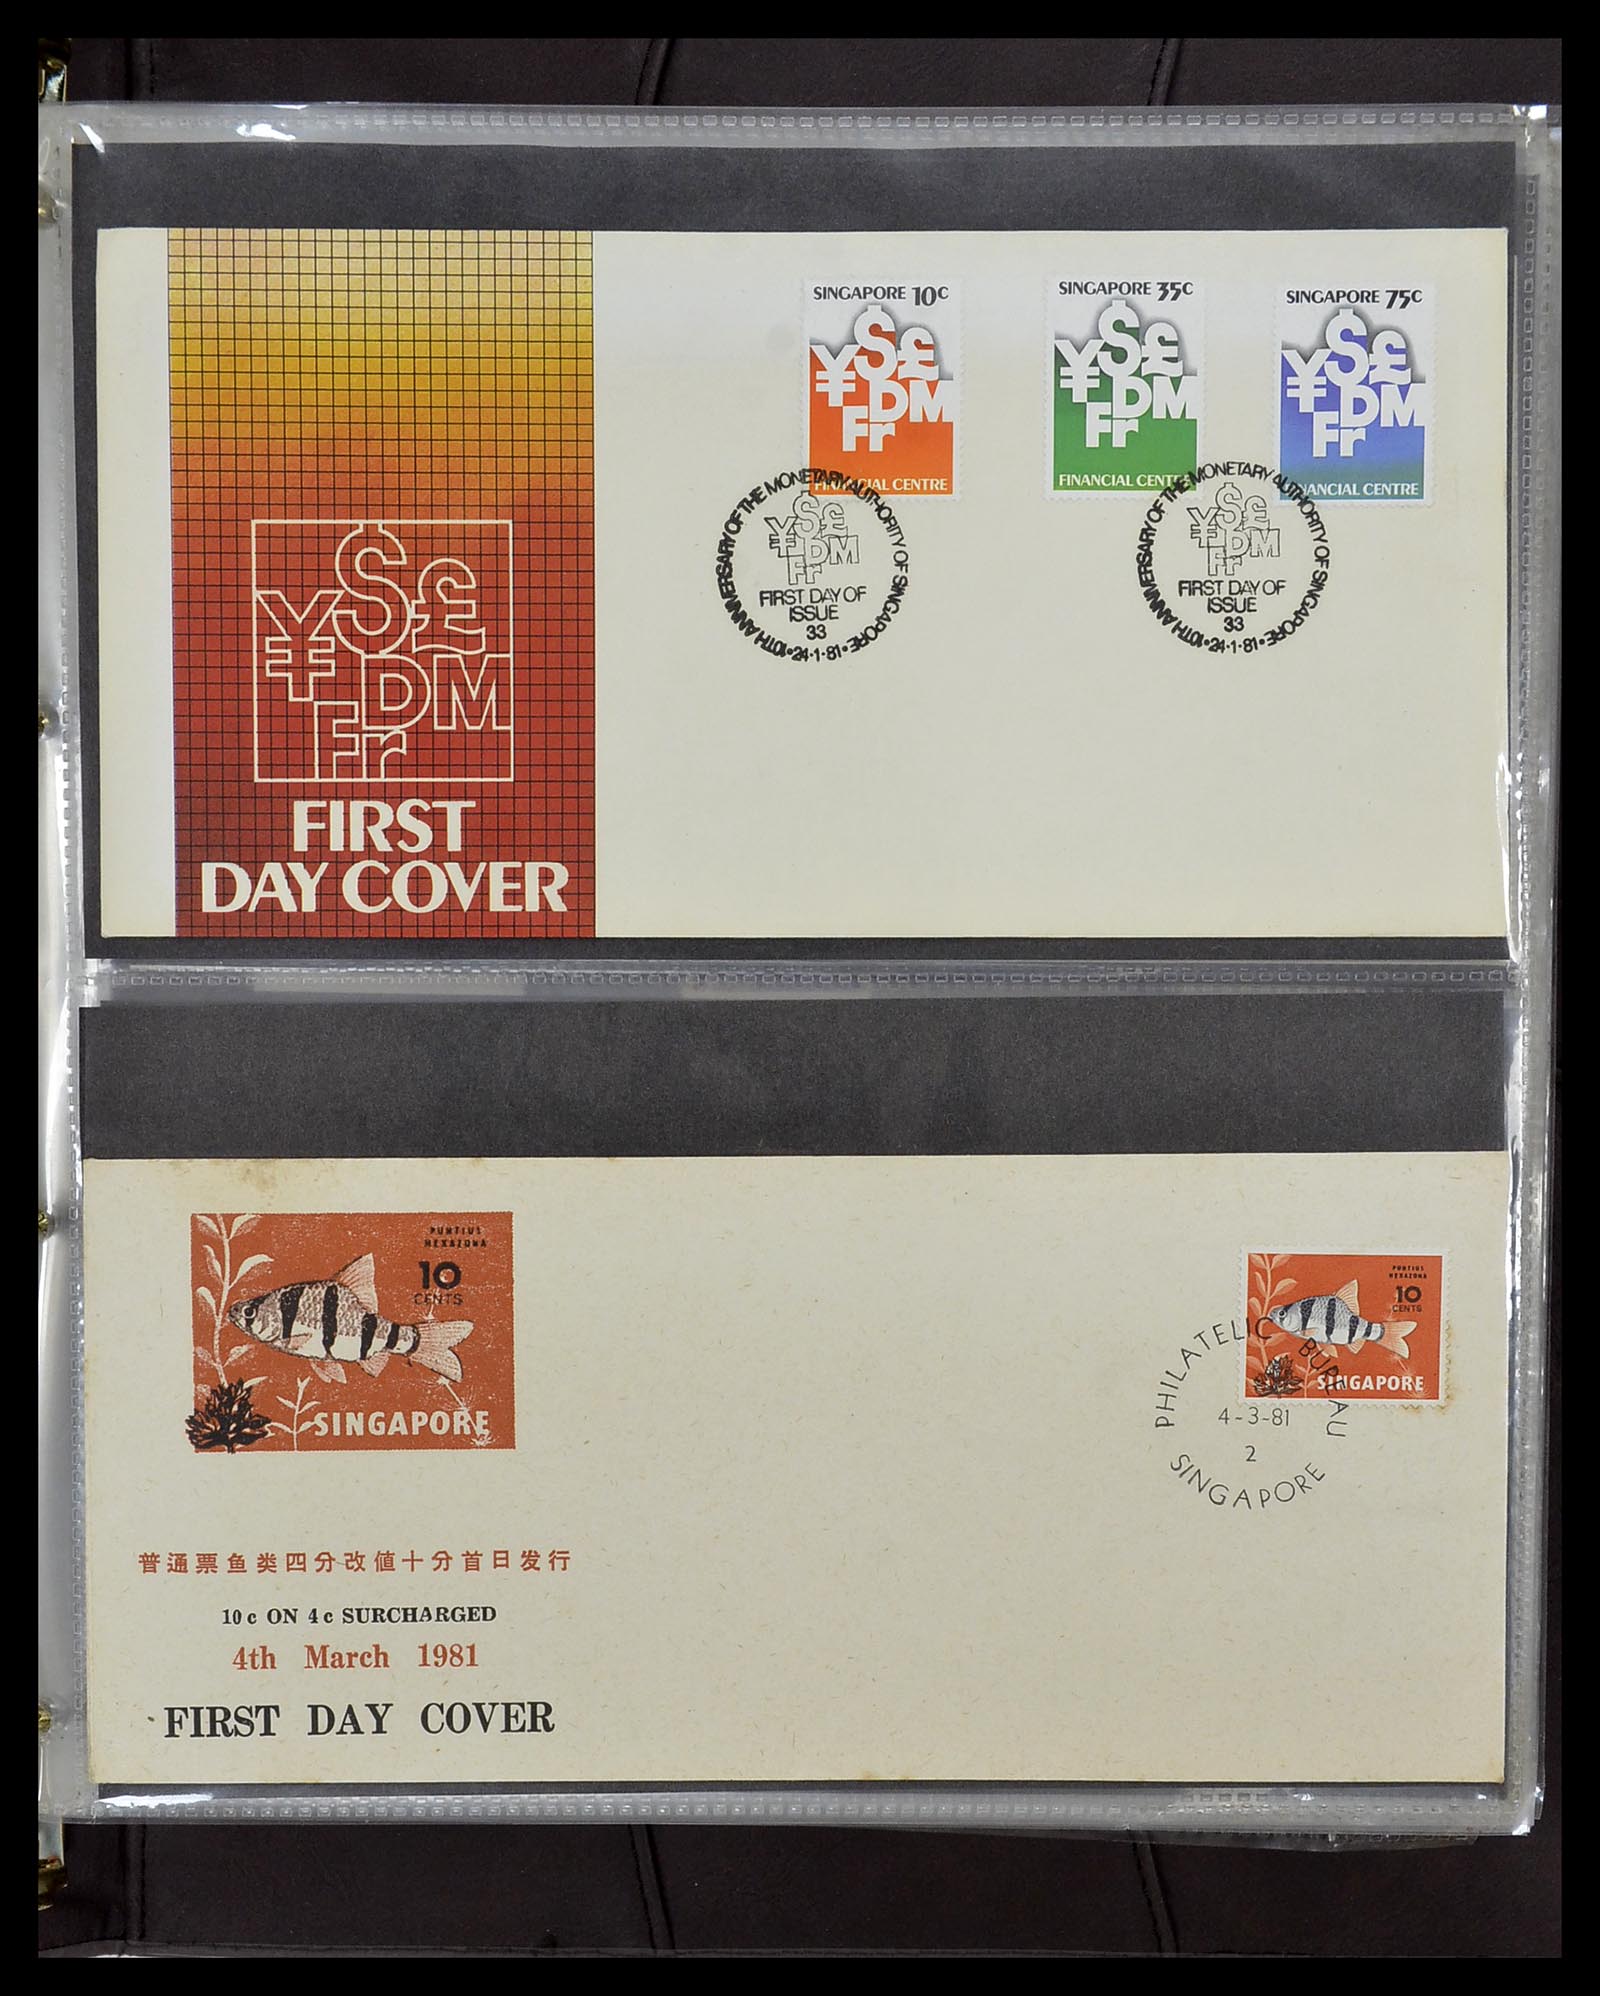 34394 077 - Stamp collection 34394 Singapore FDC's 1948-2015!